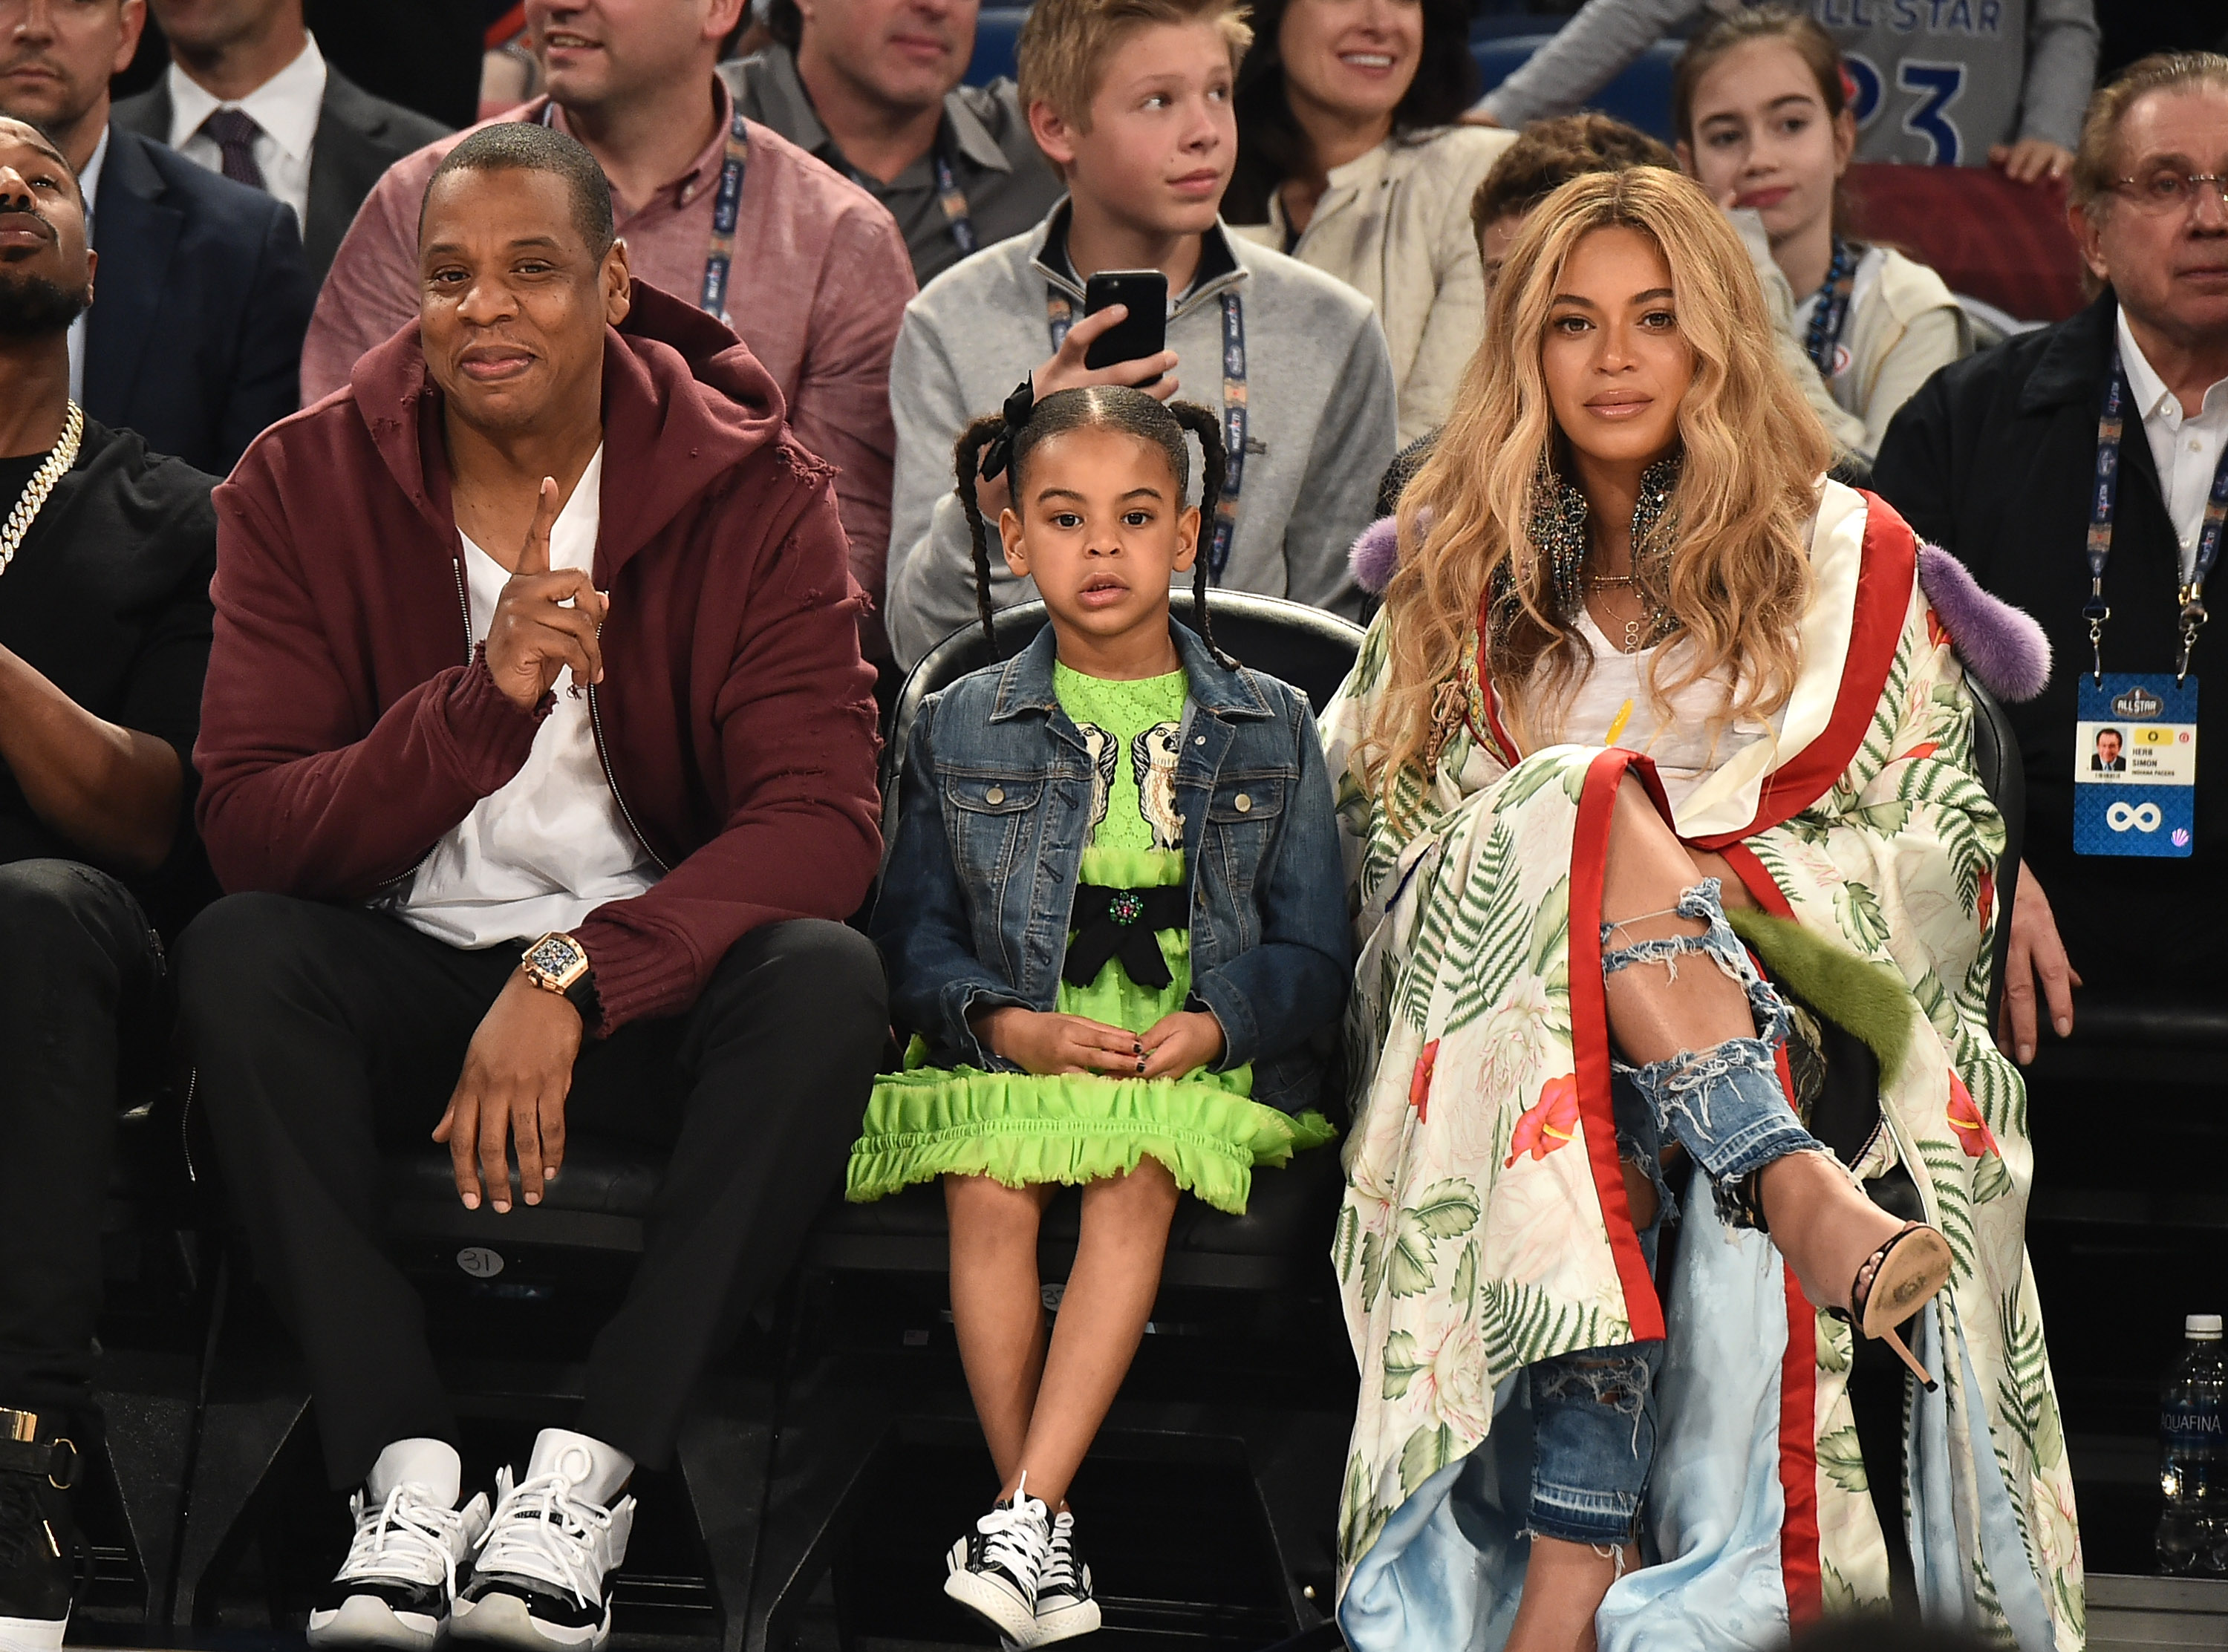 Jay Z, Blue Ivy Carter, and Beyoncé Knowles attend the 66th NBA All-Star Game on February 19, 2017 in New Orleans, Louisiana | Source: Getty Images